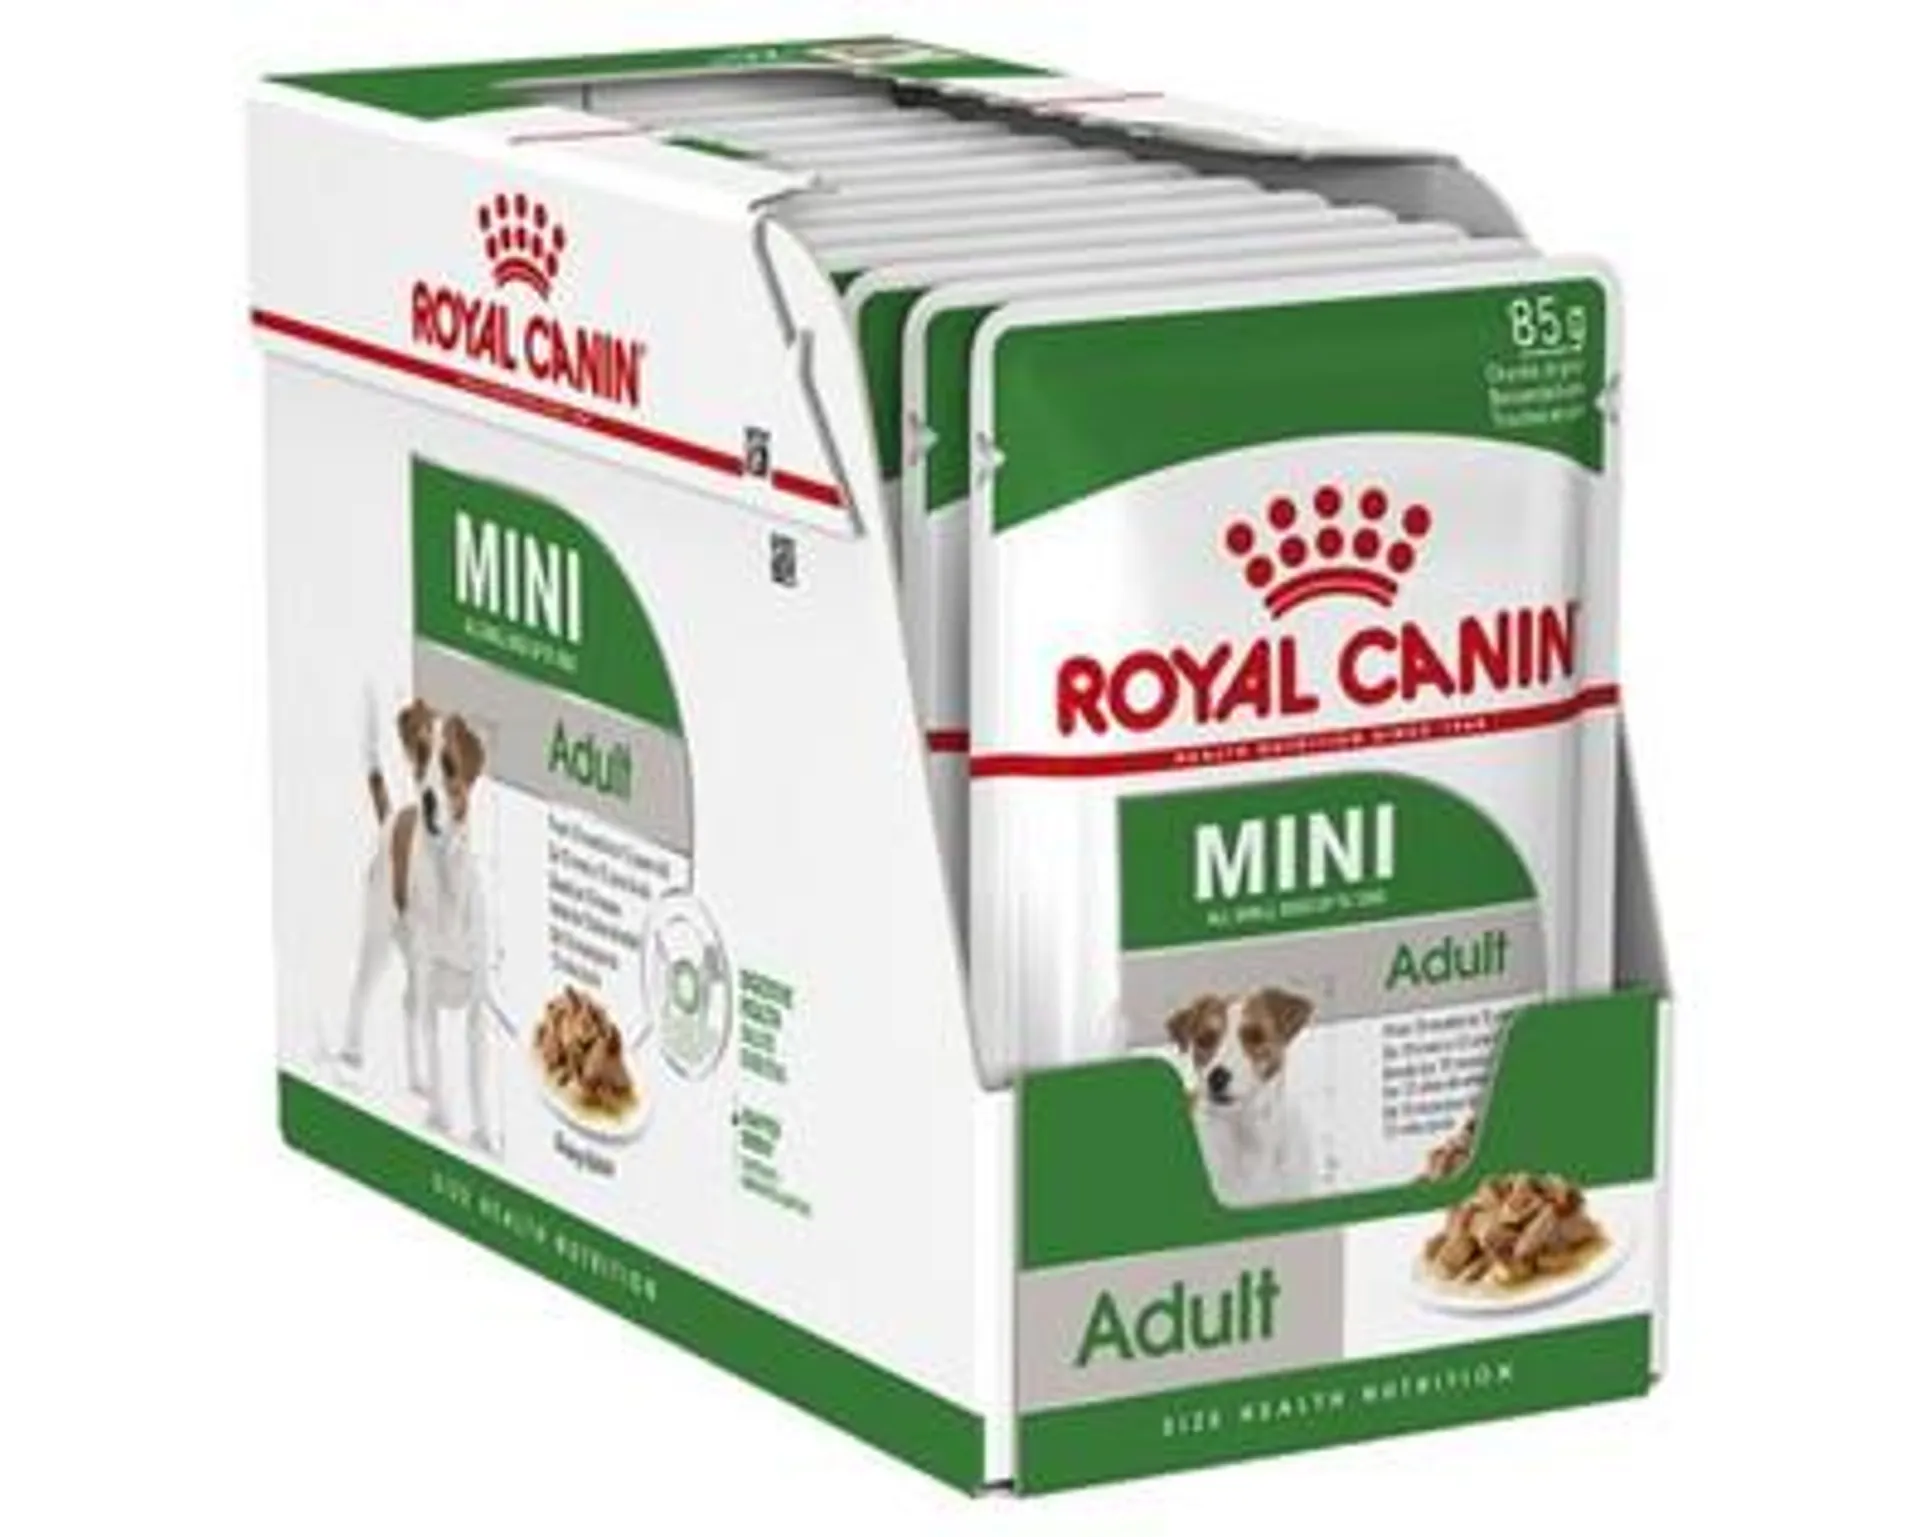 Royal Canin Mini Adult Wet Dog Food Pouches